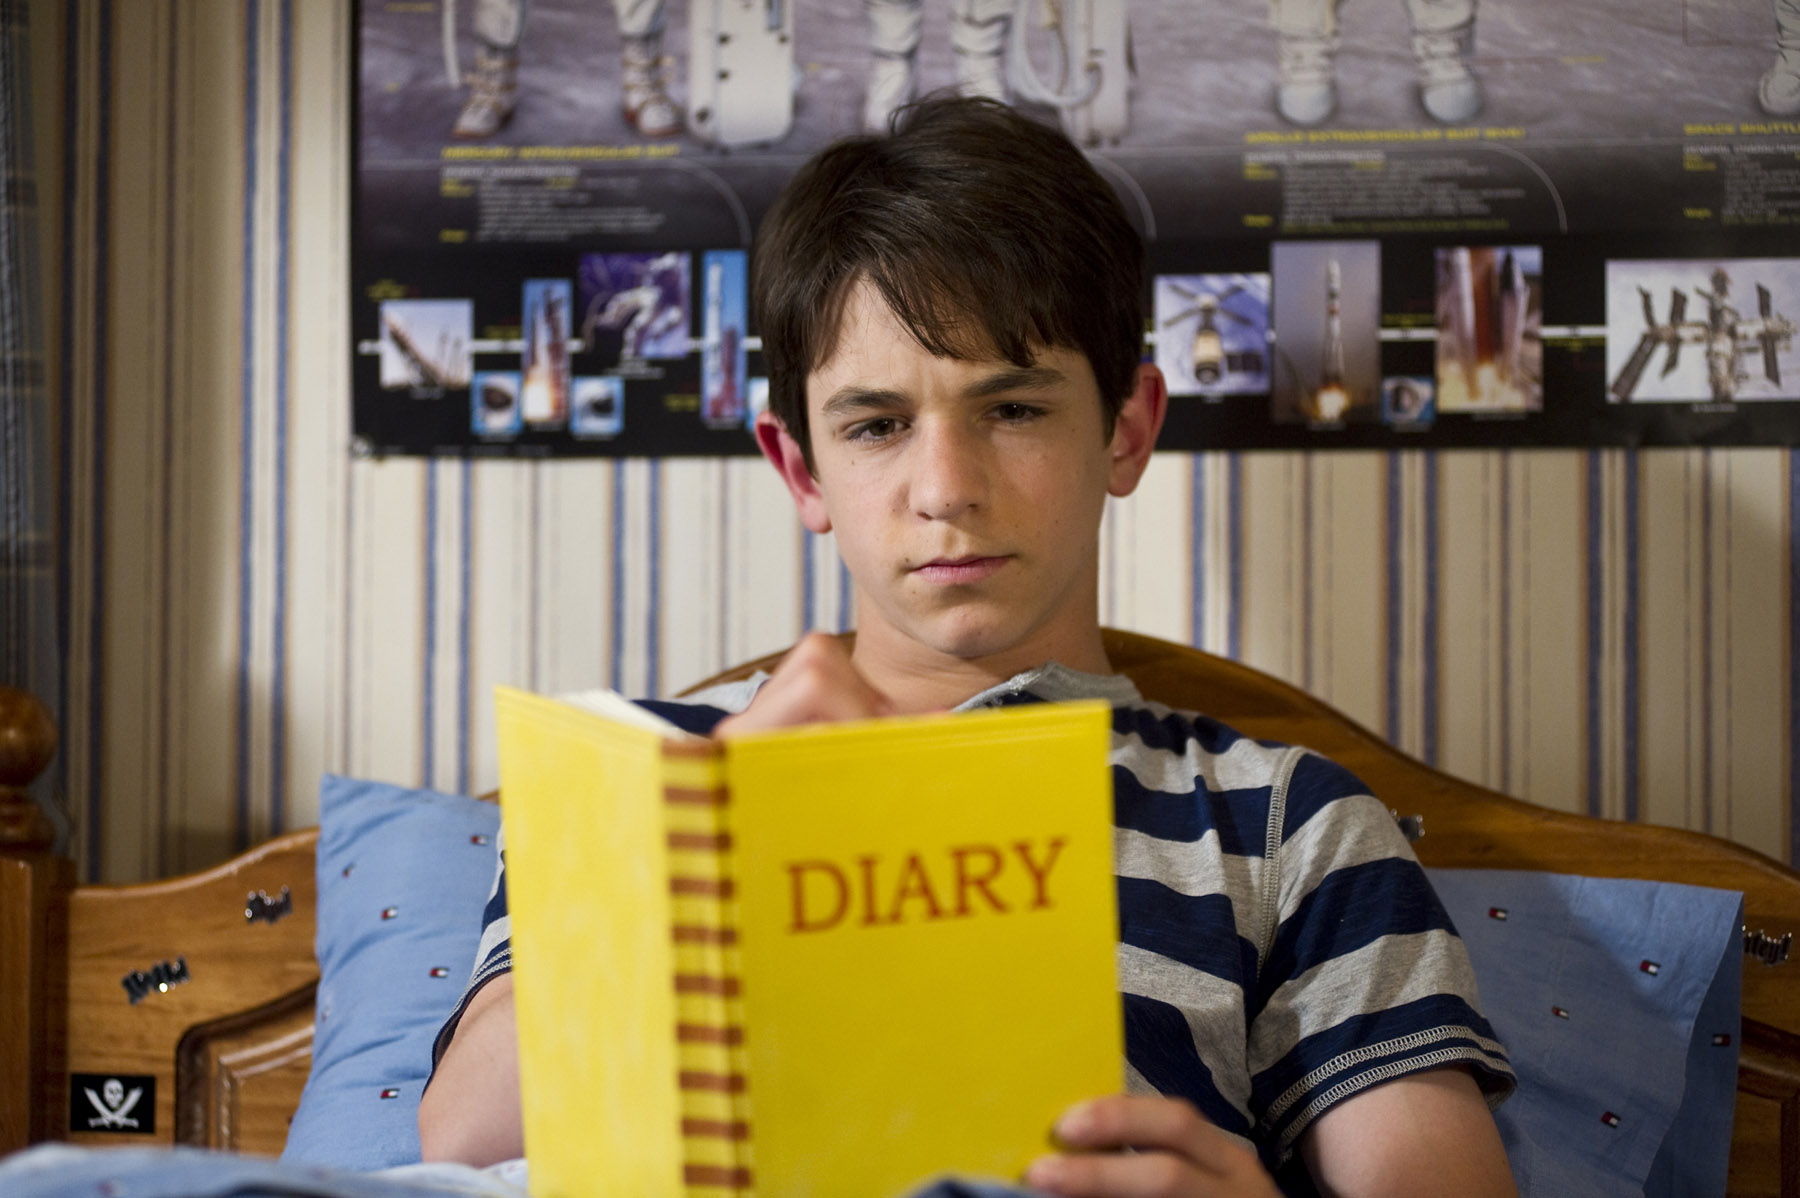 MORE TEENAGE MISADVENTURES IN “DIARY OF A WIMPY KID: DOG DAYS” MOVIE